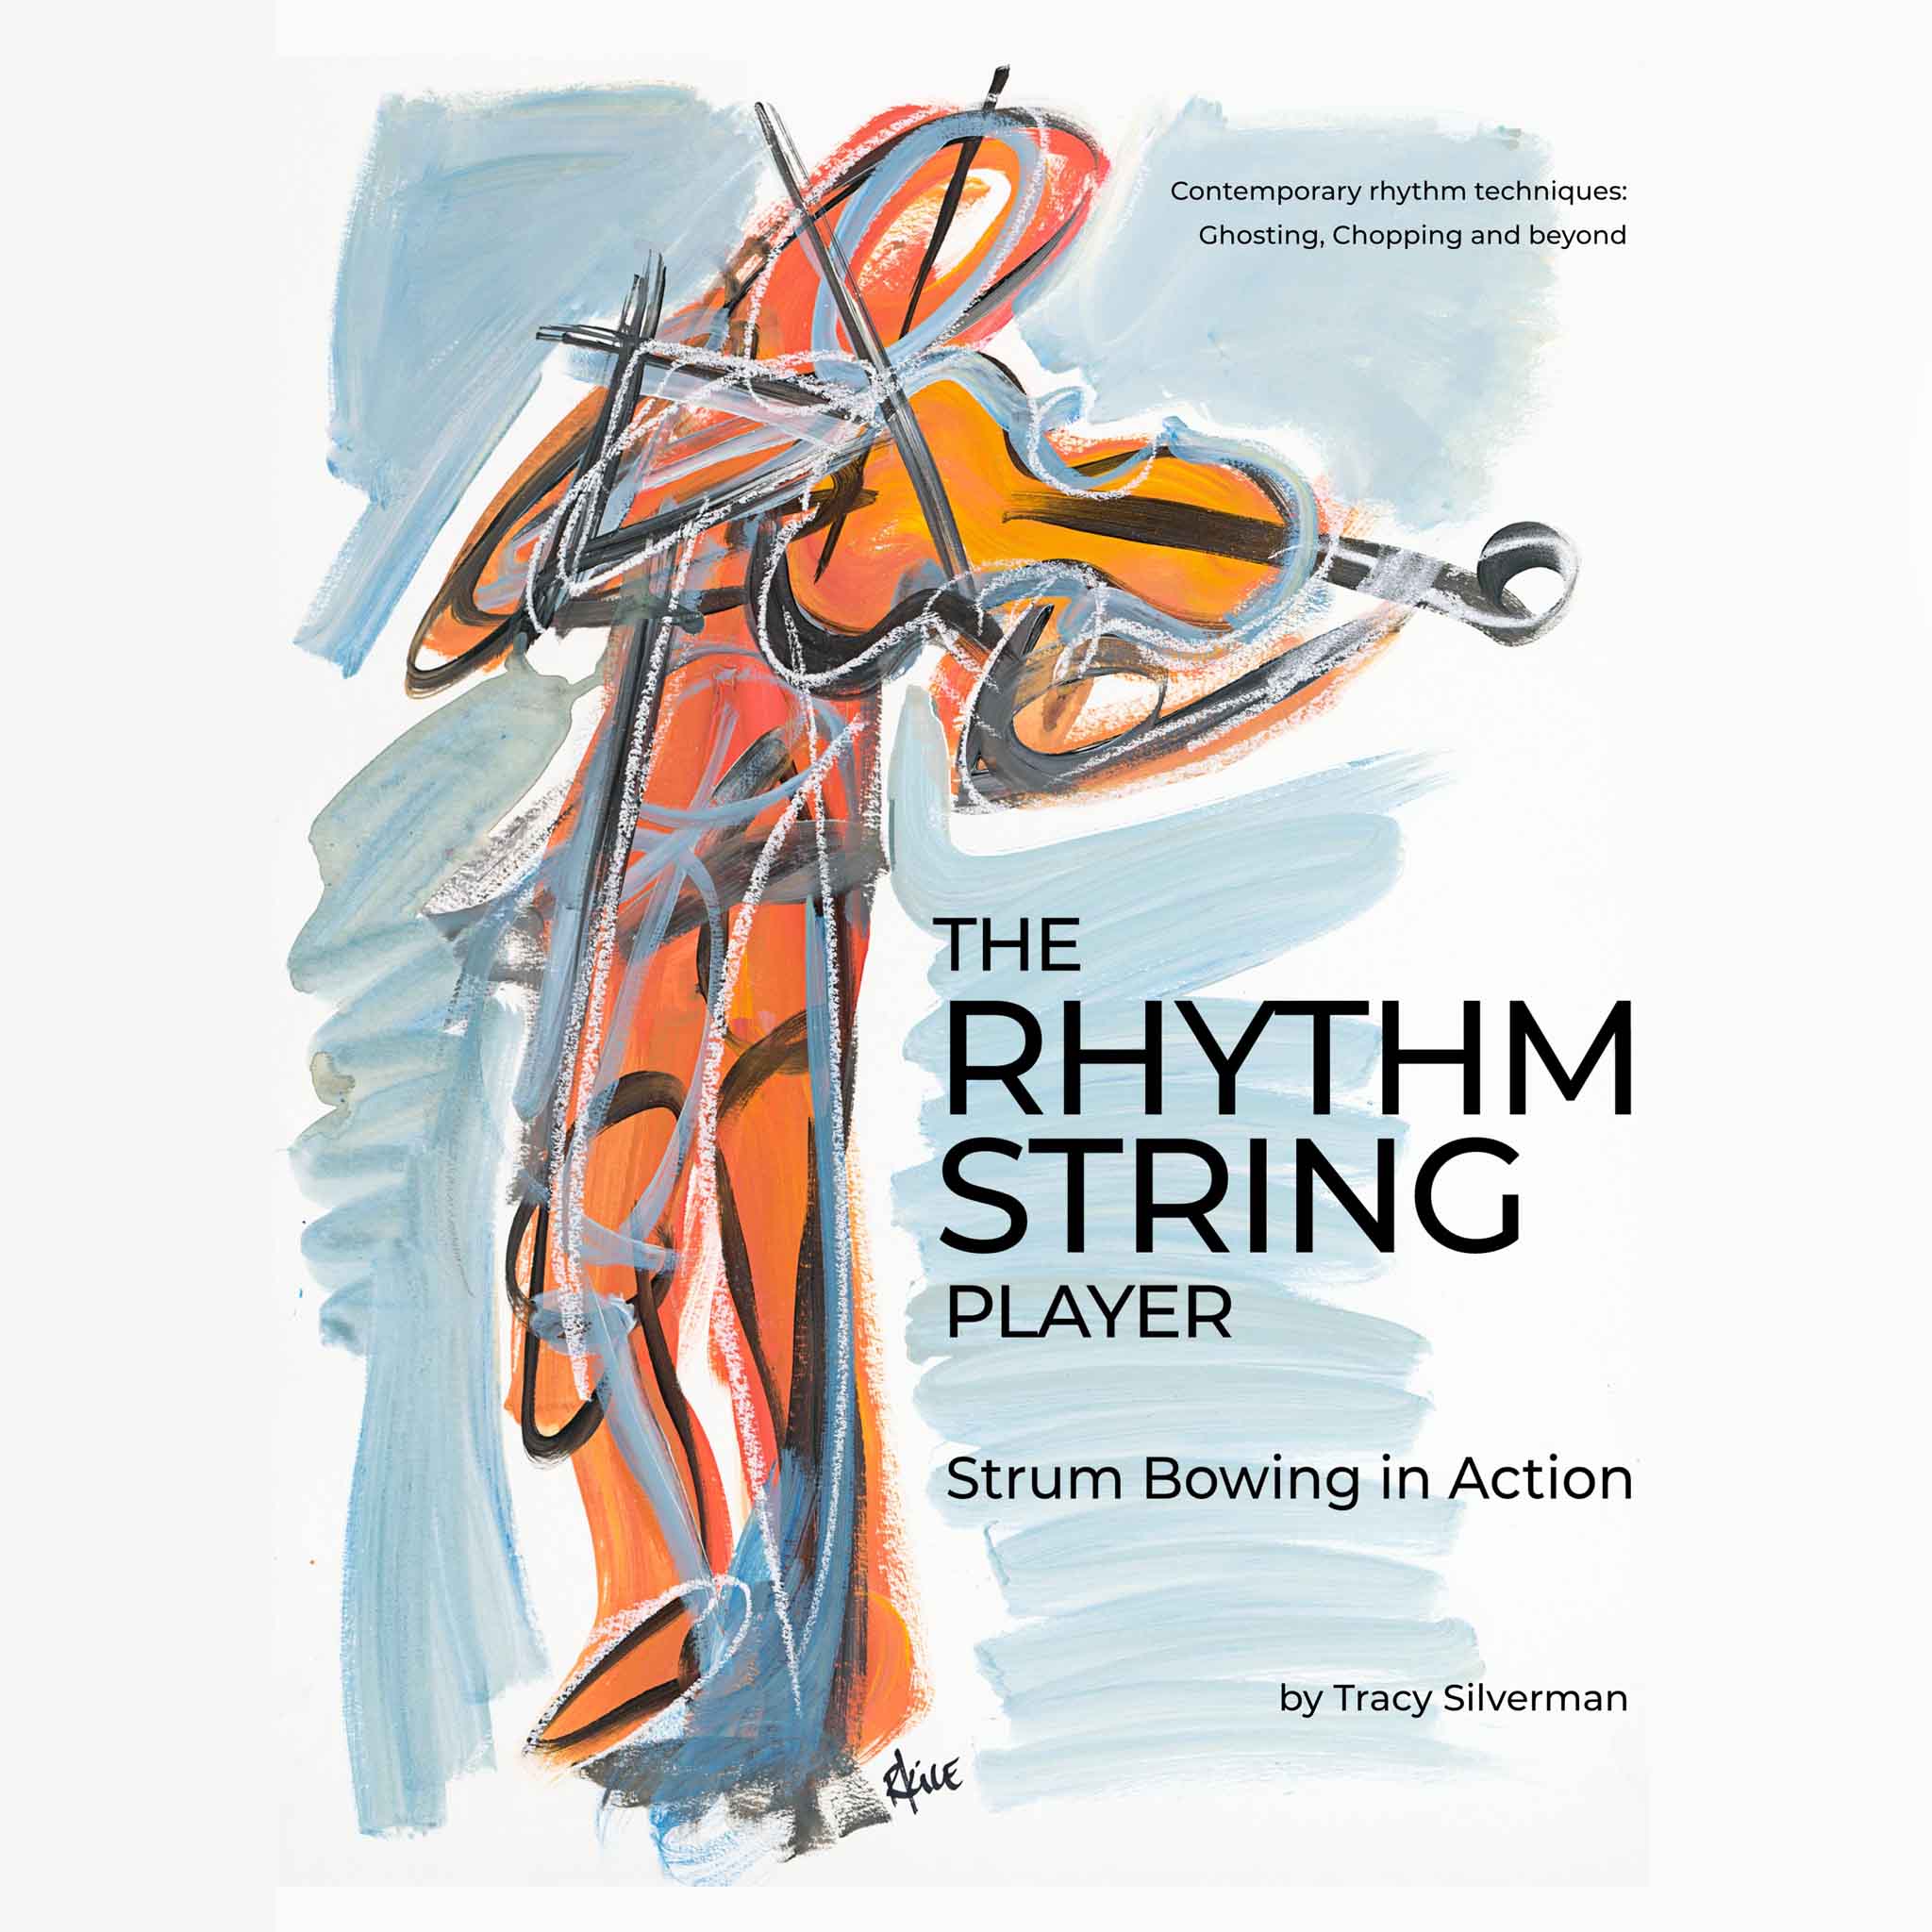 The Rhythm String Player: Strum Bowing In Action